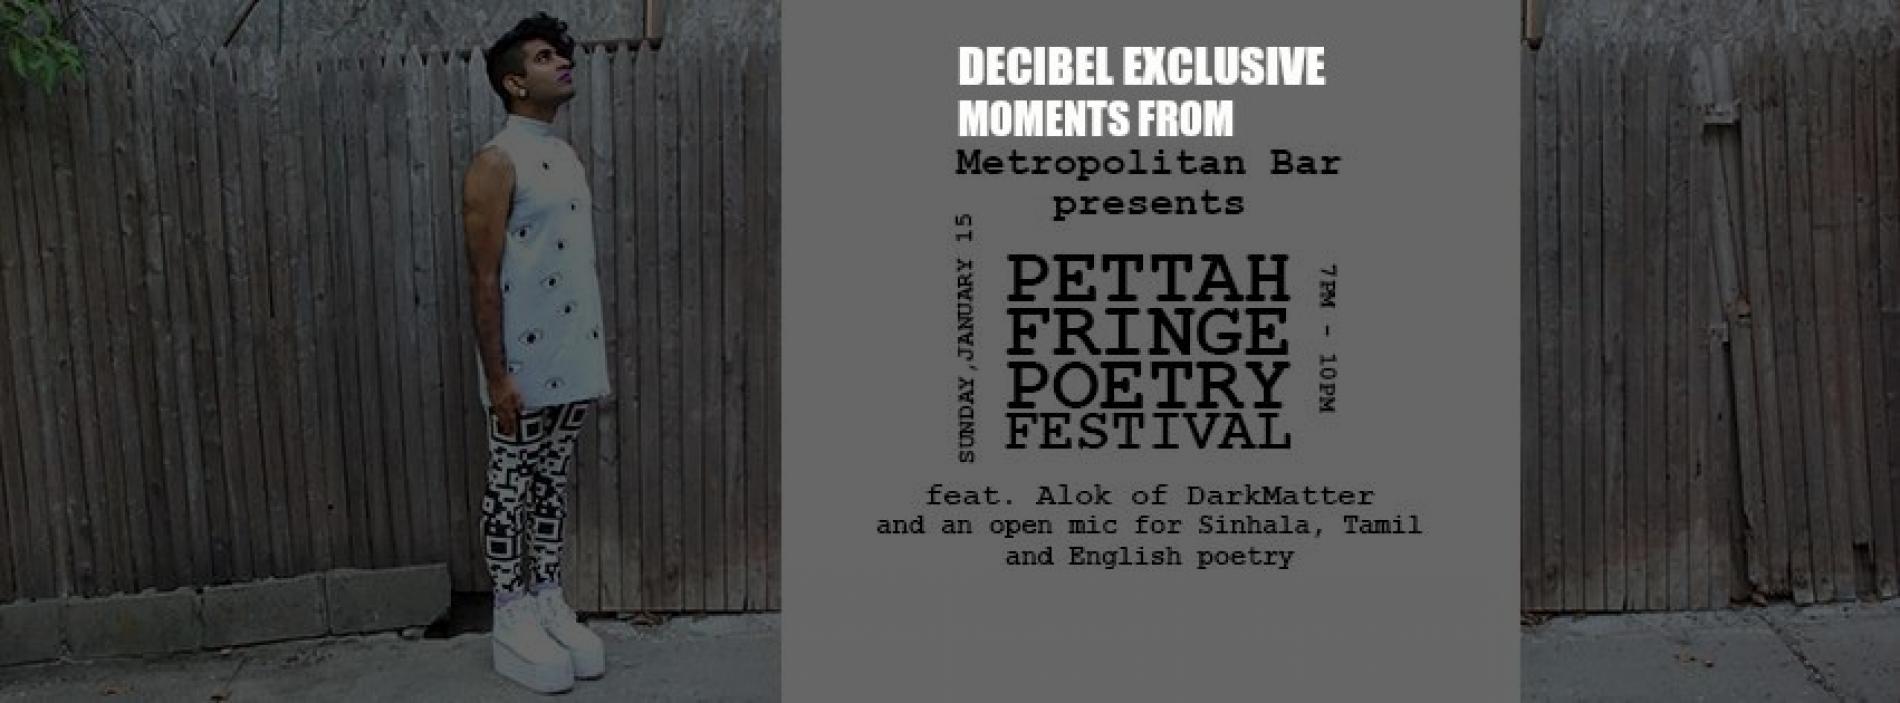 Decibel Exculsive : Moments From The Pettah Poetry Fringe Festival